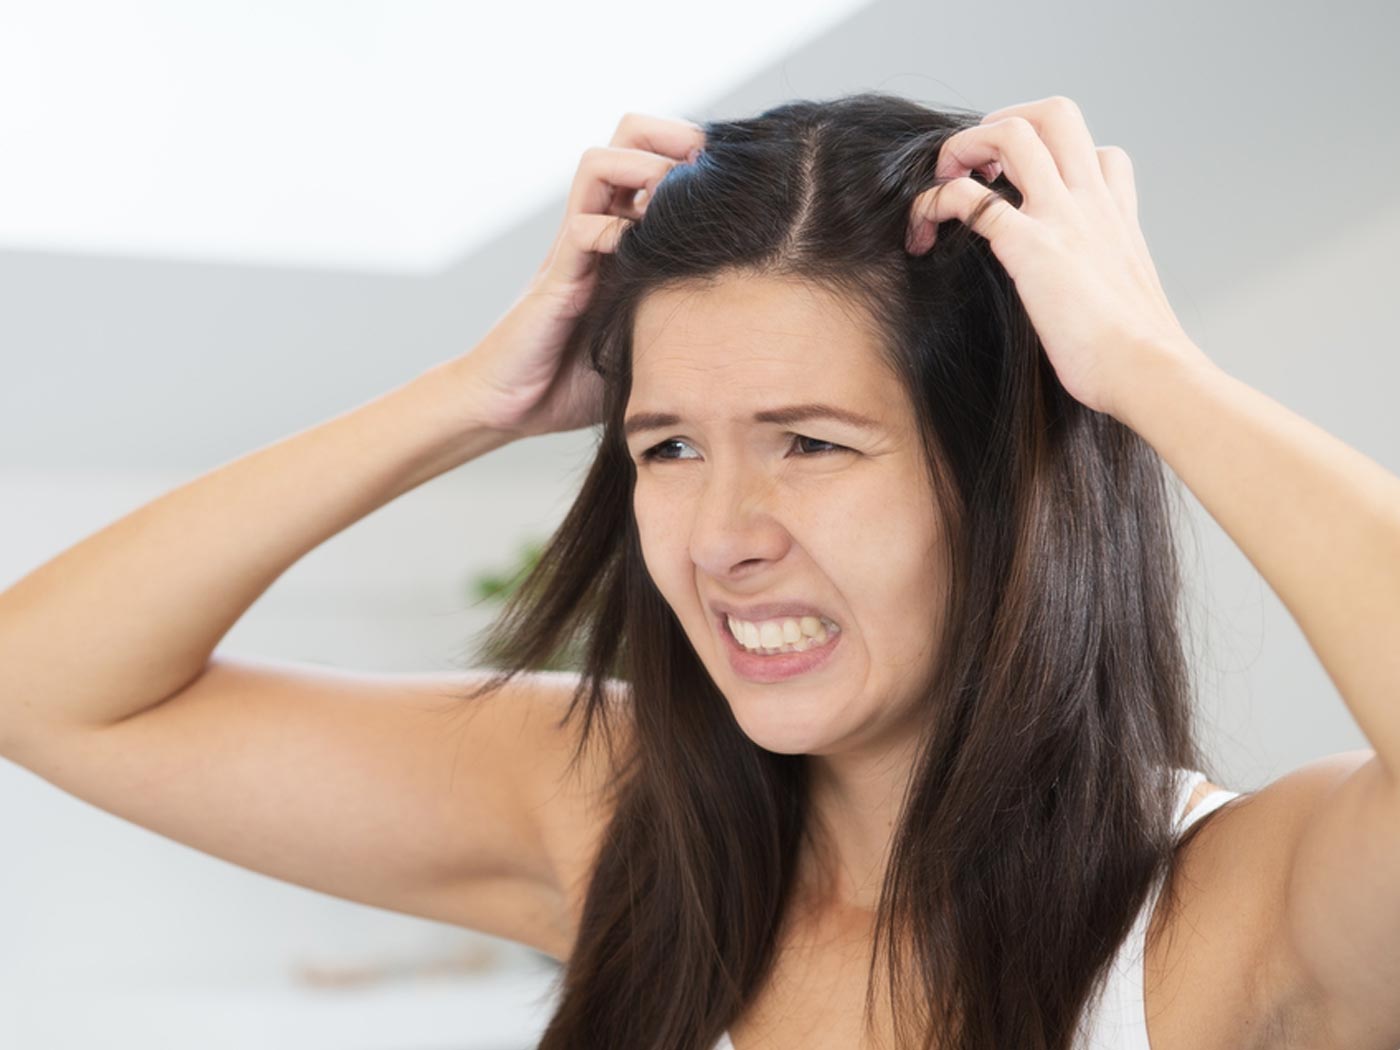 Dealing With an Itchy Scalp? Here are Some Home Remedies that Will Help